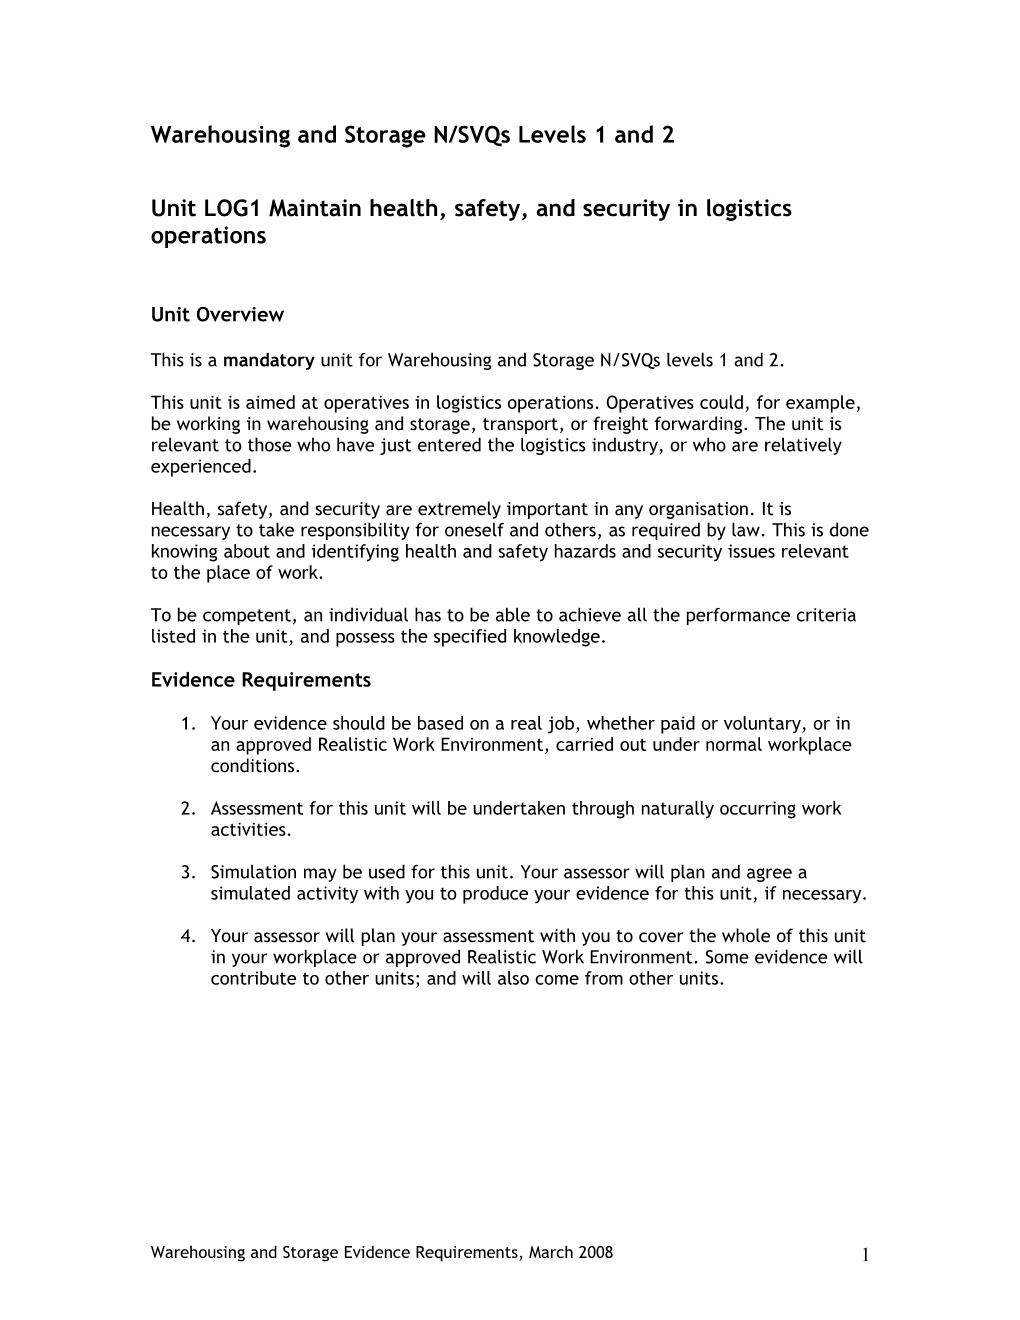 Unit 1-Maintain Health, Safety, and Security in Logistics Operations